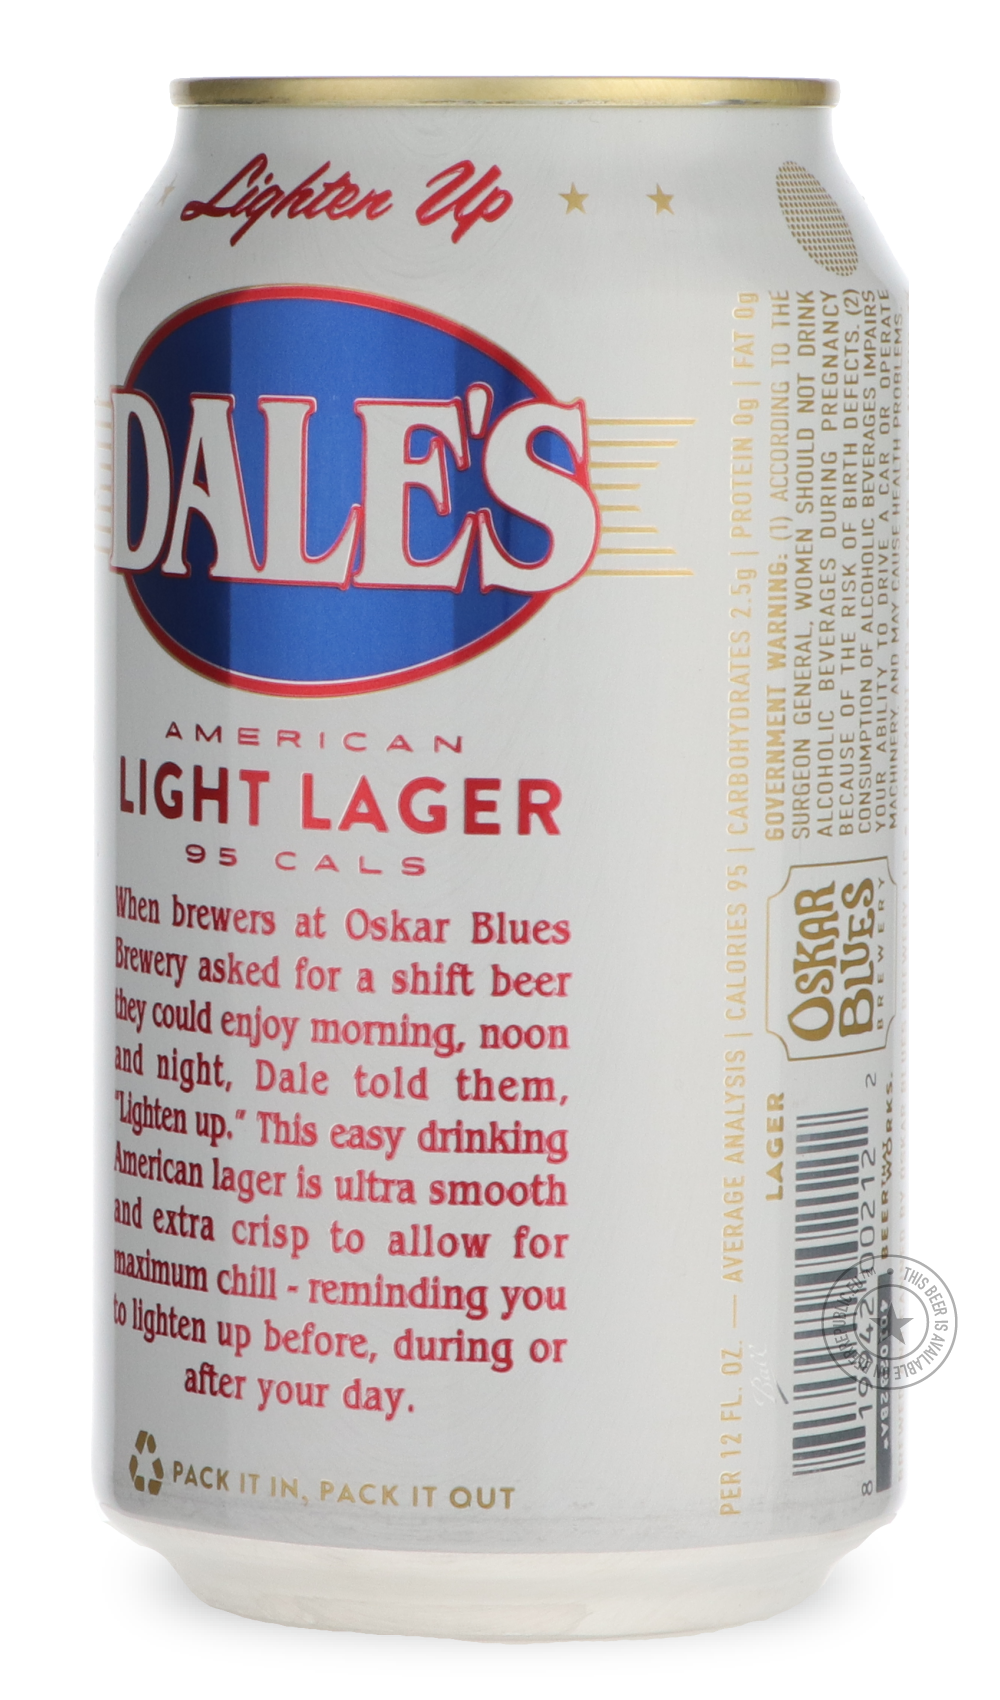 -Oskar Blues- Dale's® Light Lager-Pale- Only @ Beer Republic - The best online beer store for American & Canadian craft beer - Buy beer online from the USA and Canada - Bier online kopen - Amerikaans bier kopen - Craft beer store - Craft beer kopen - Amerikanisch bier kaufen - Bier online kaufen - Acheter biere online - IPA - Stout - Porter - New England IPA - Hazy IPA - Imperial Stout - Barrel Aged - Barrel Aged Imperial Stout - Brown - Dark beer - Blond - Blonde - Pilsner - Lager - Wheat - Weizen - Amber 